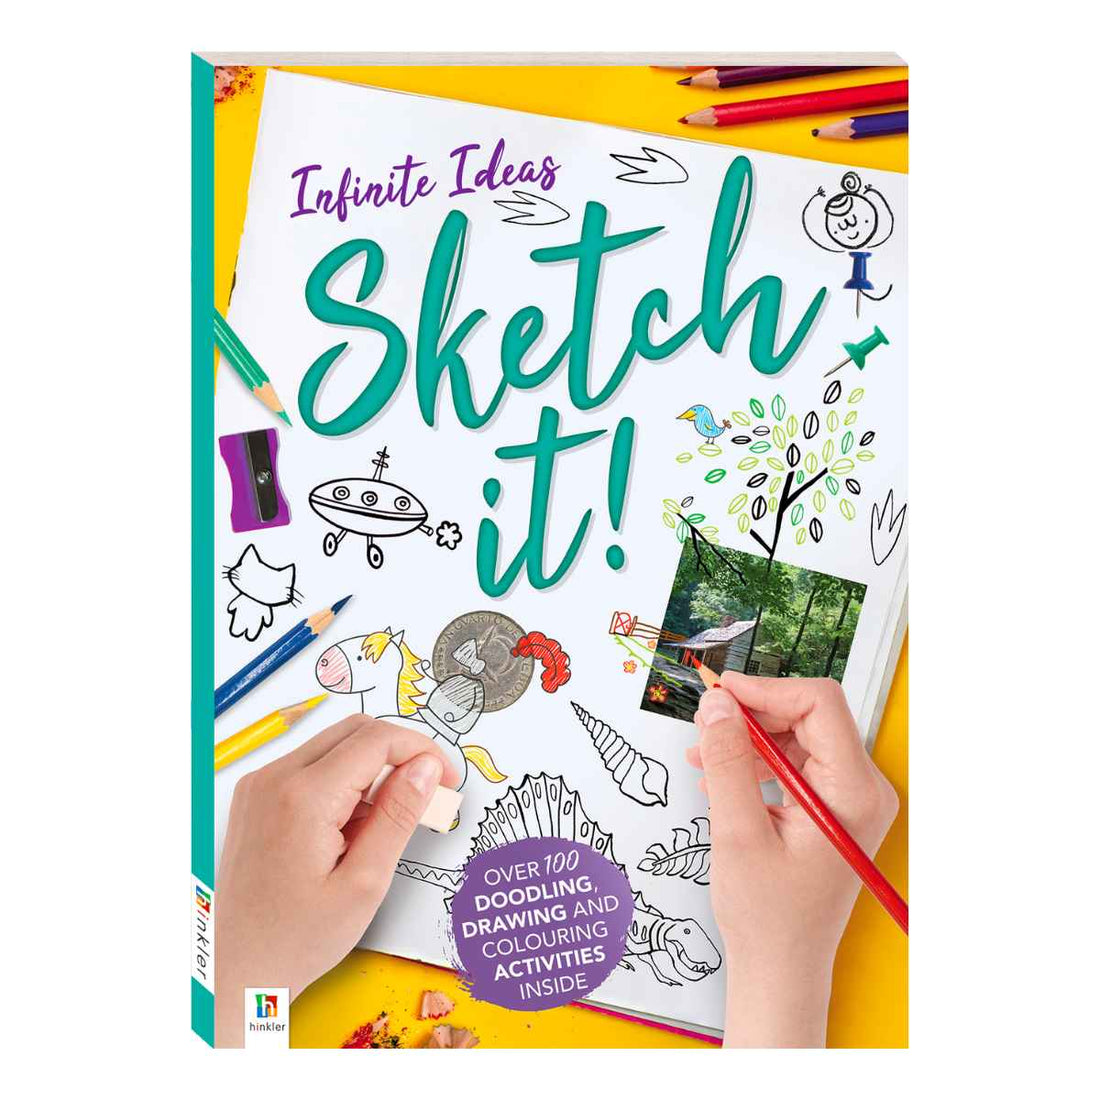 Infinite Ideas, Sketch And Draw Book